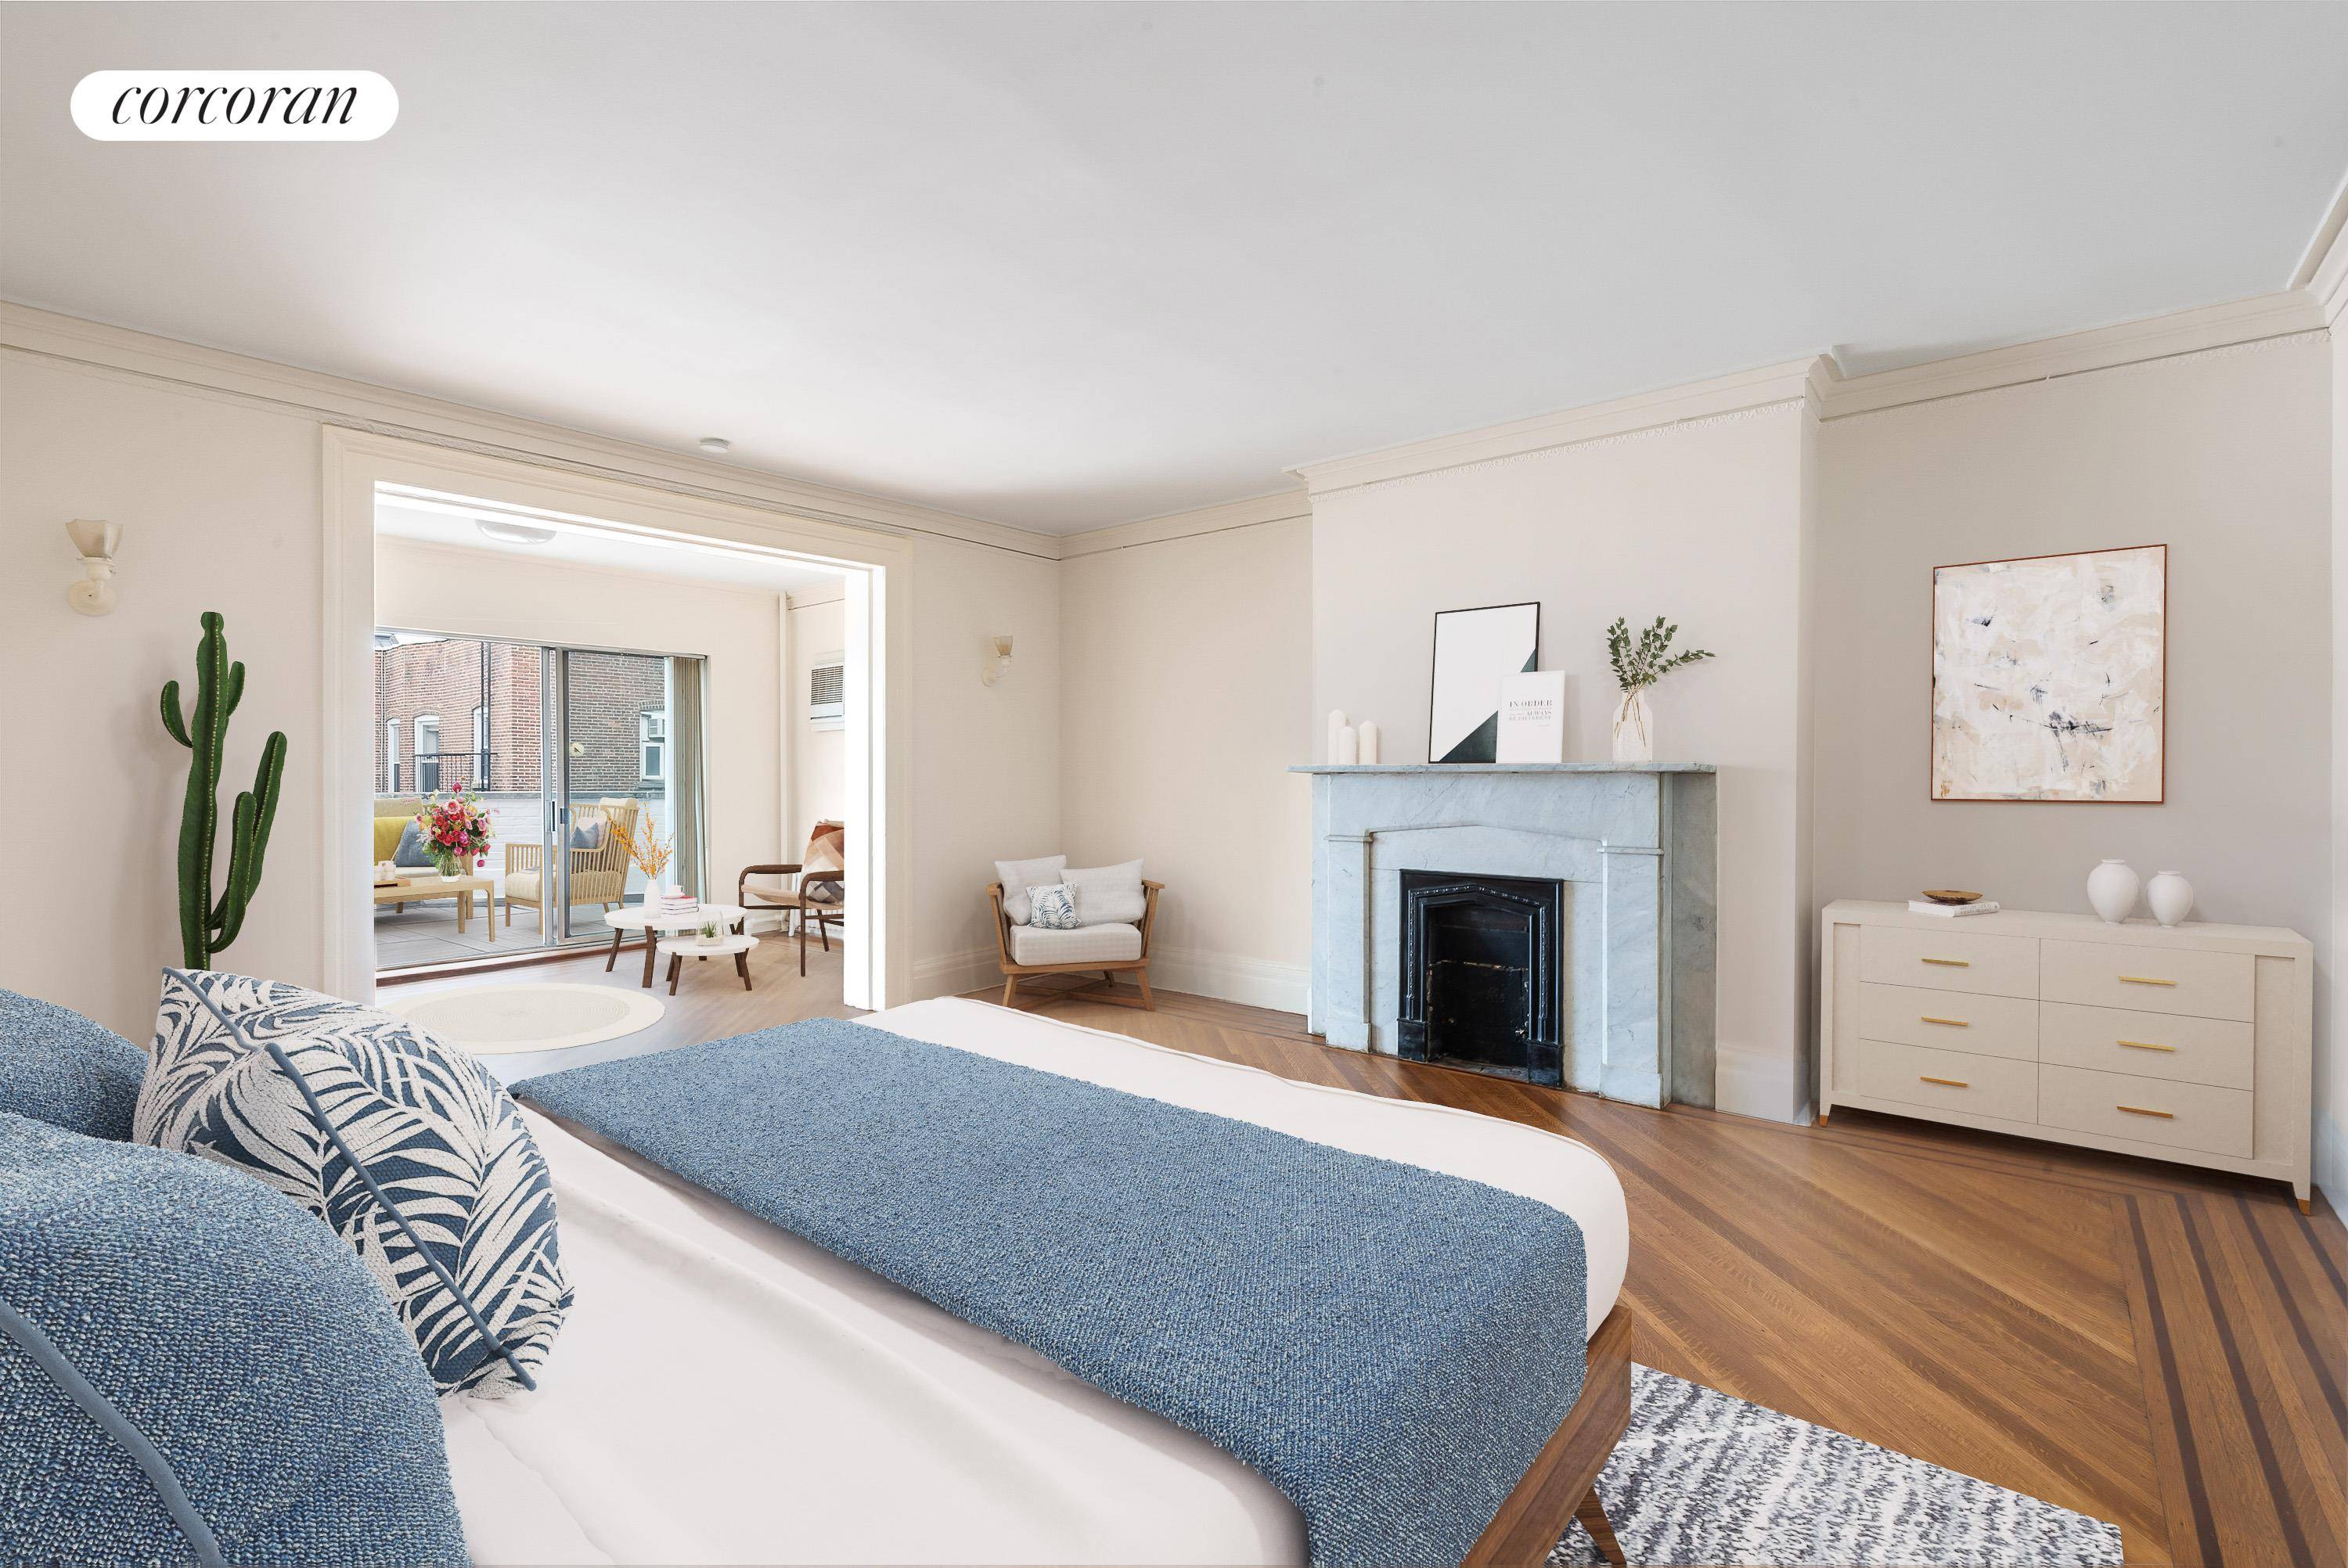 Brooklyn Heights triplex co op in an historic 25 ft wide townhouse.